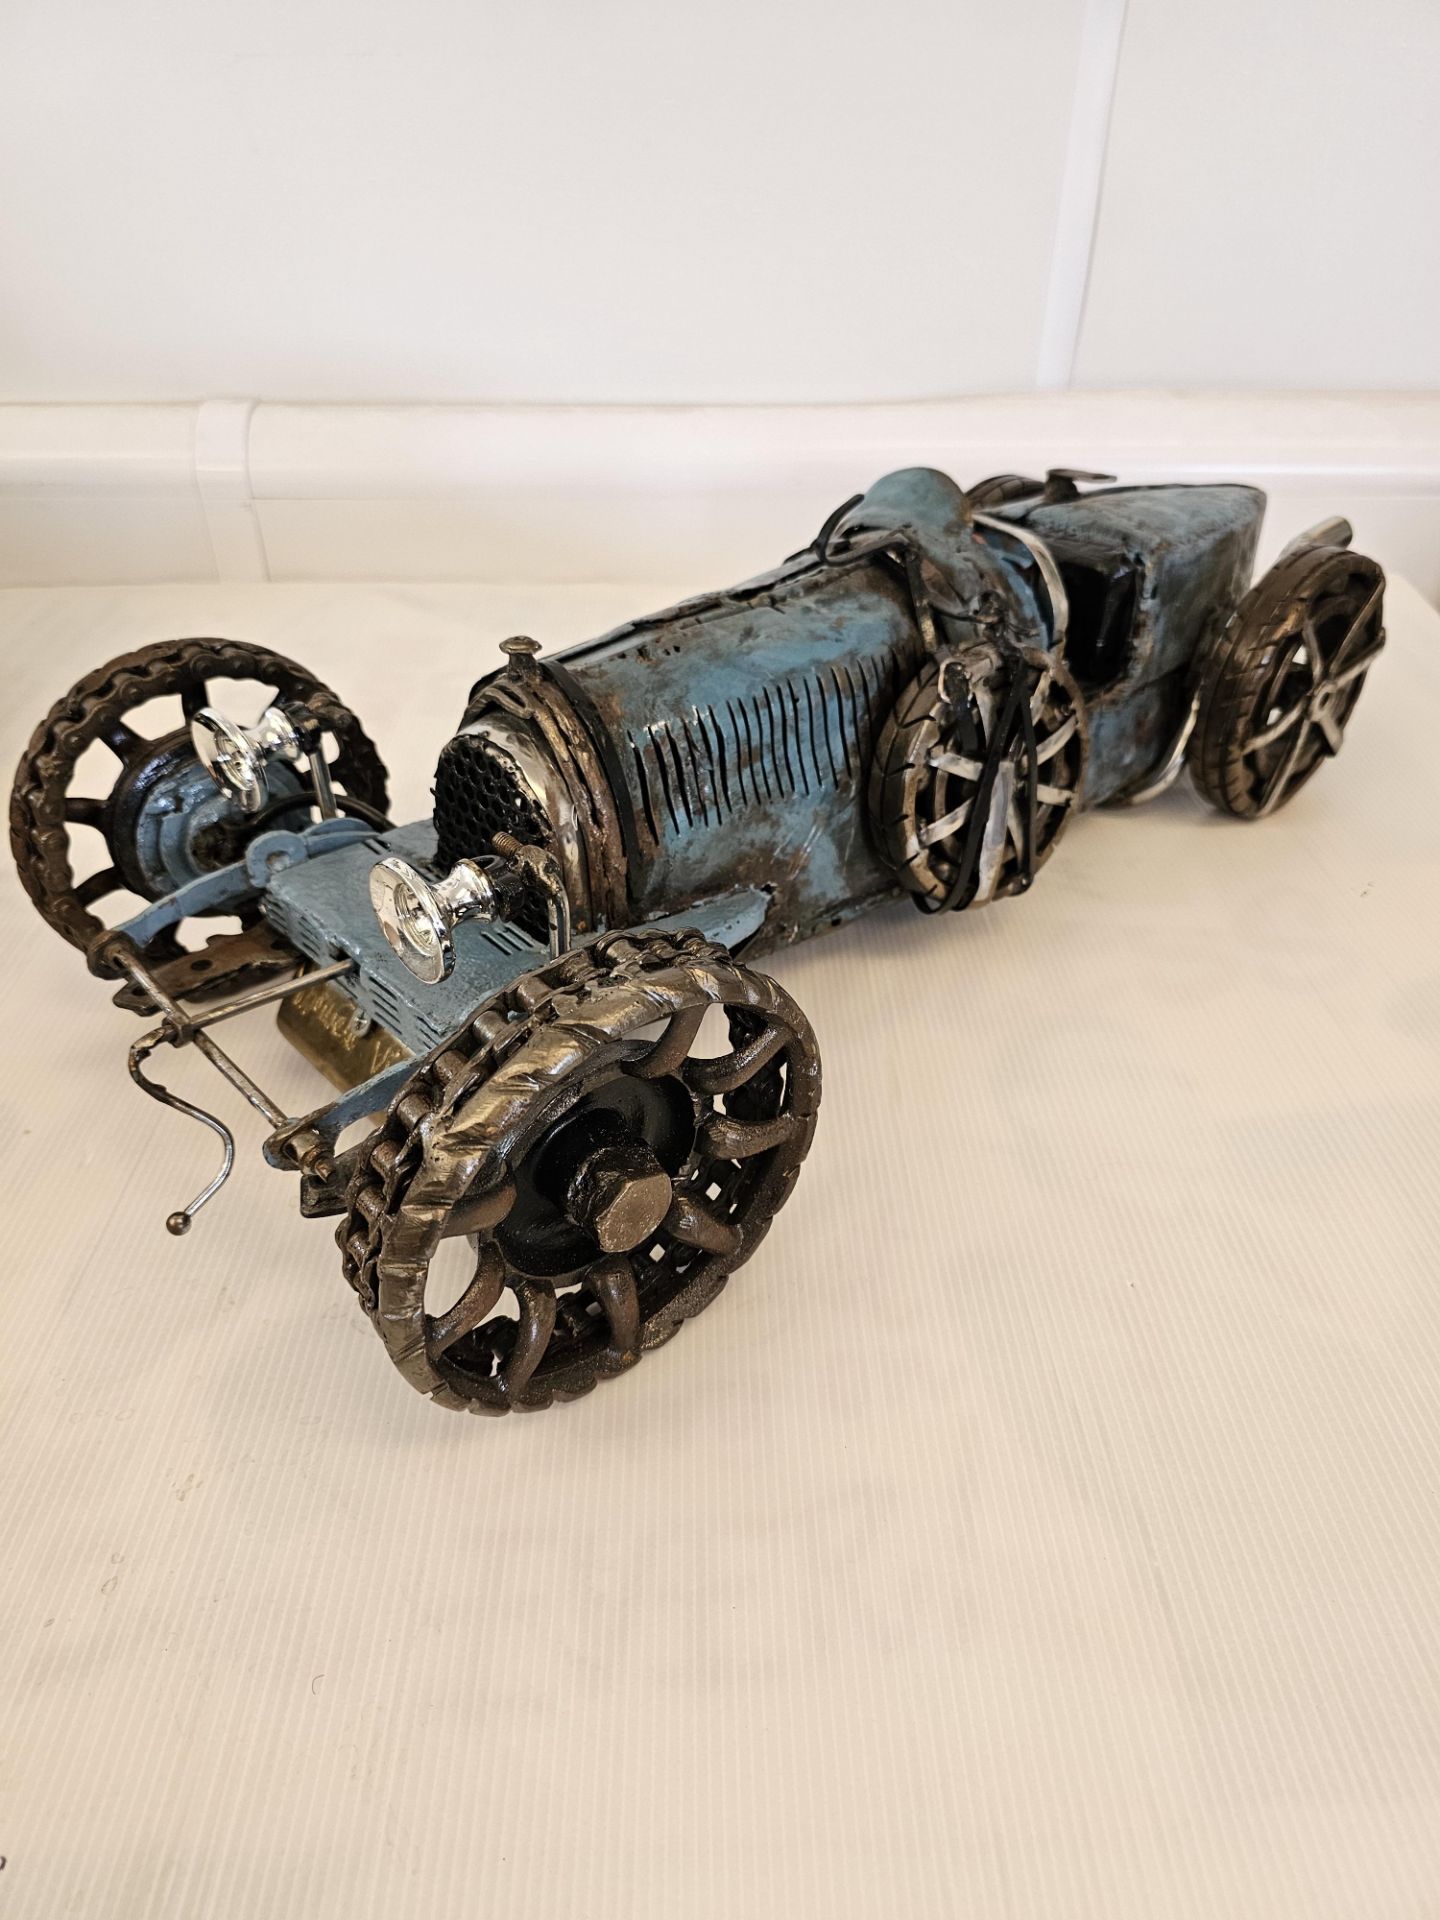 1923 Mercedes Benz 10/30 HP - One-off artistic model made from Iron, steel and glass, These rare and - Image 7 of 7